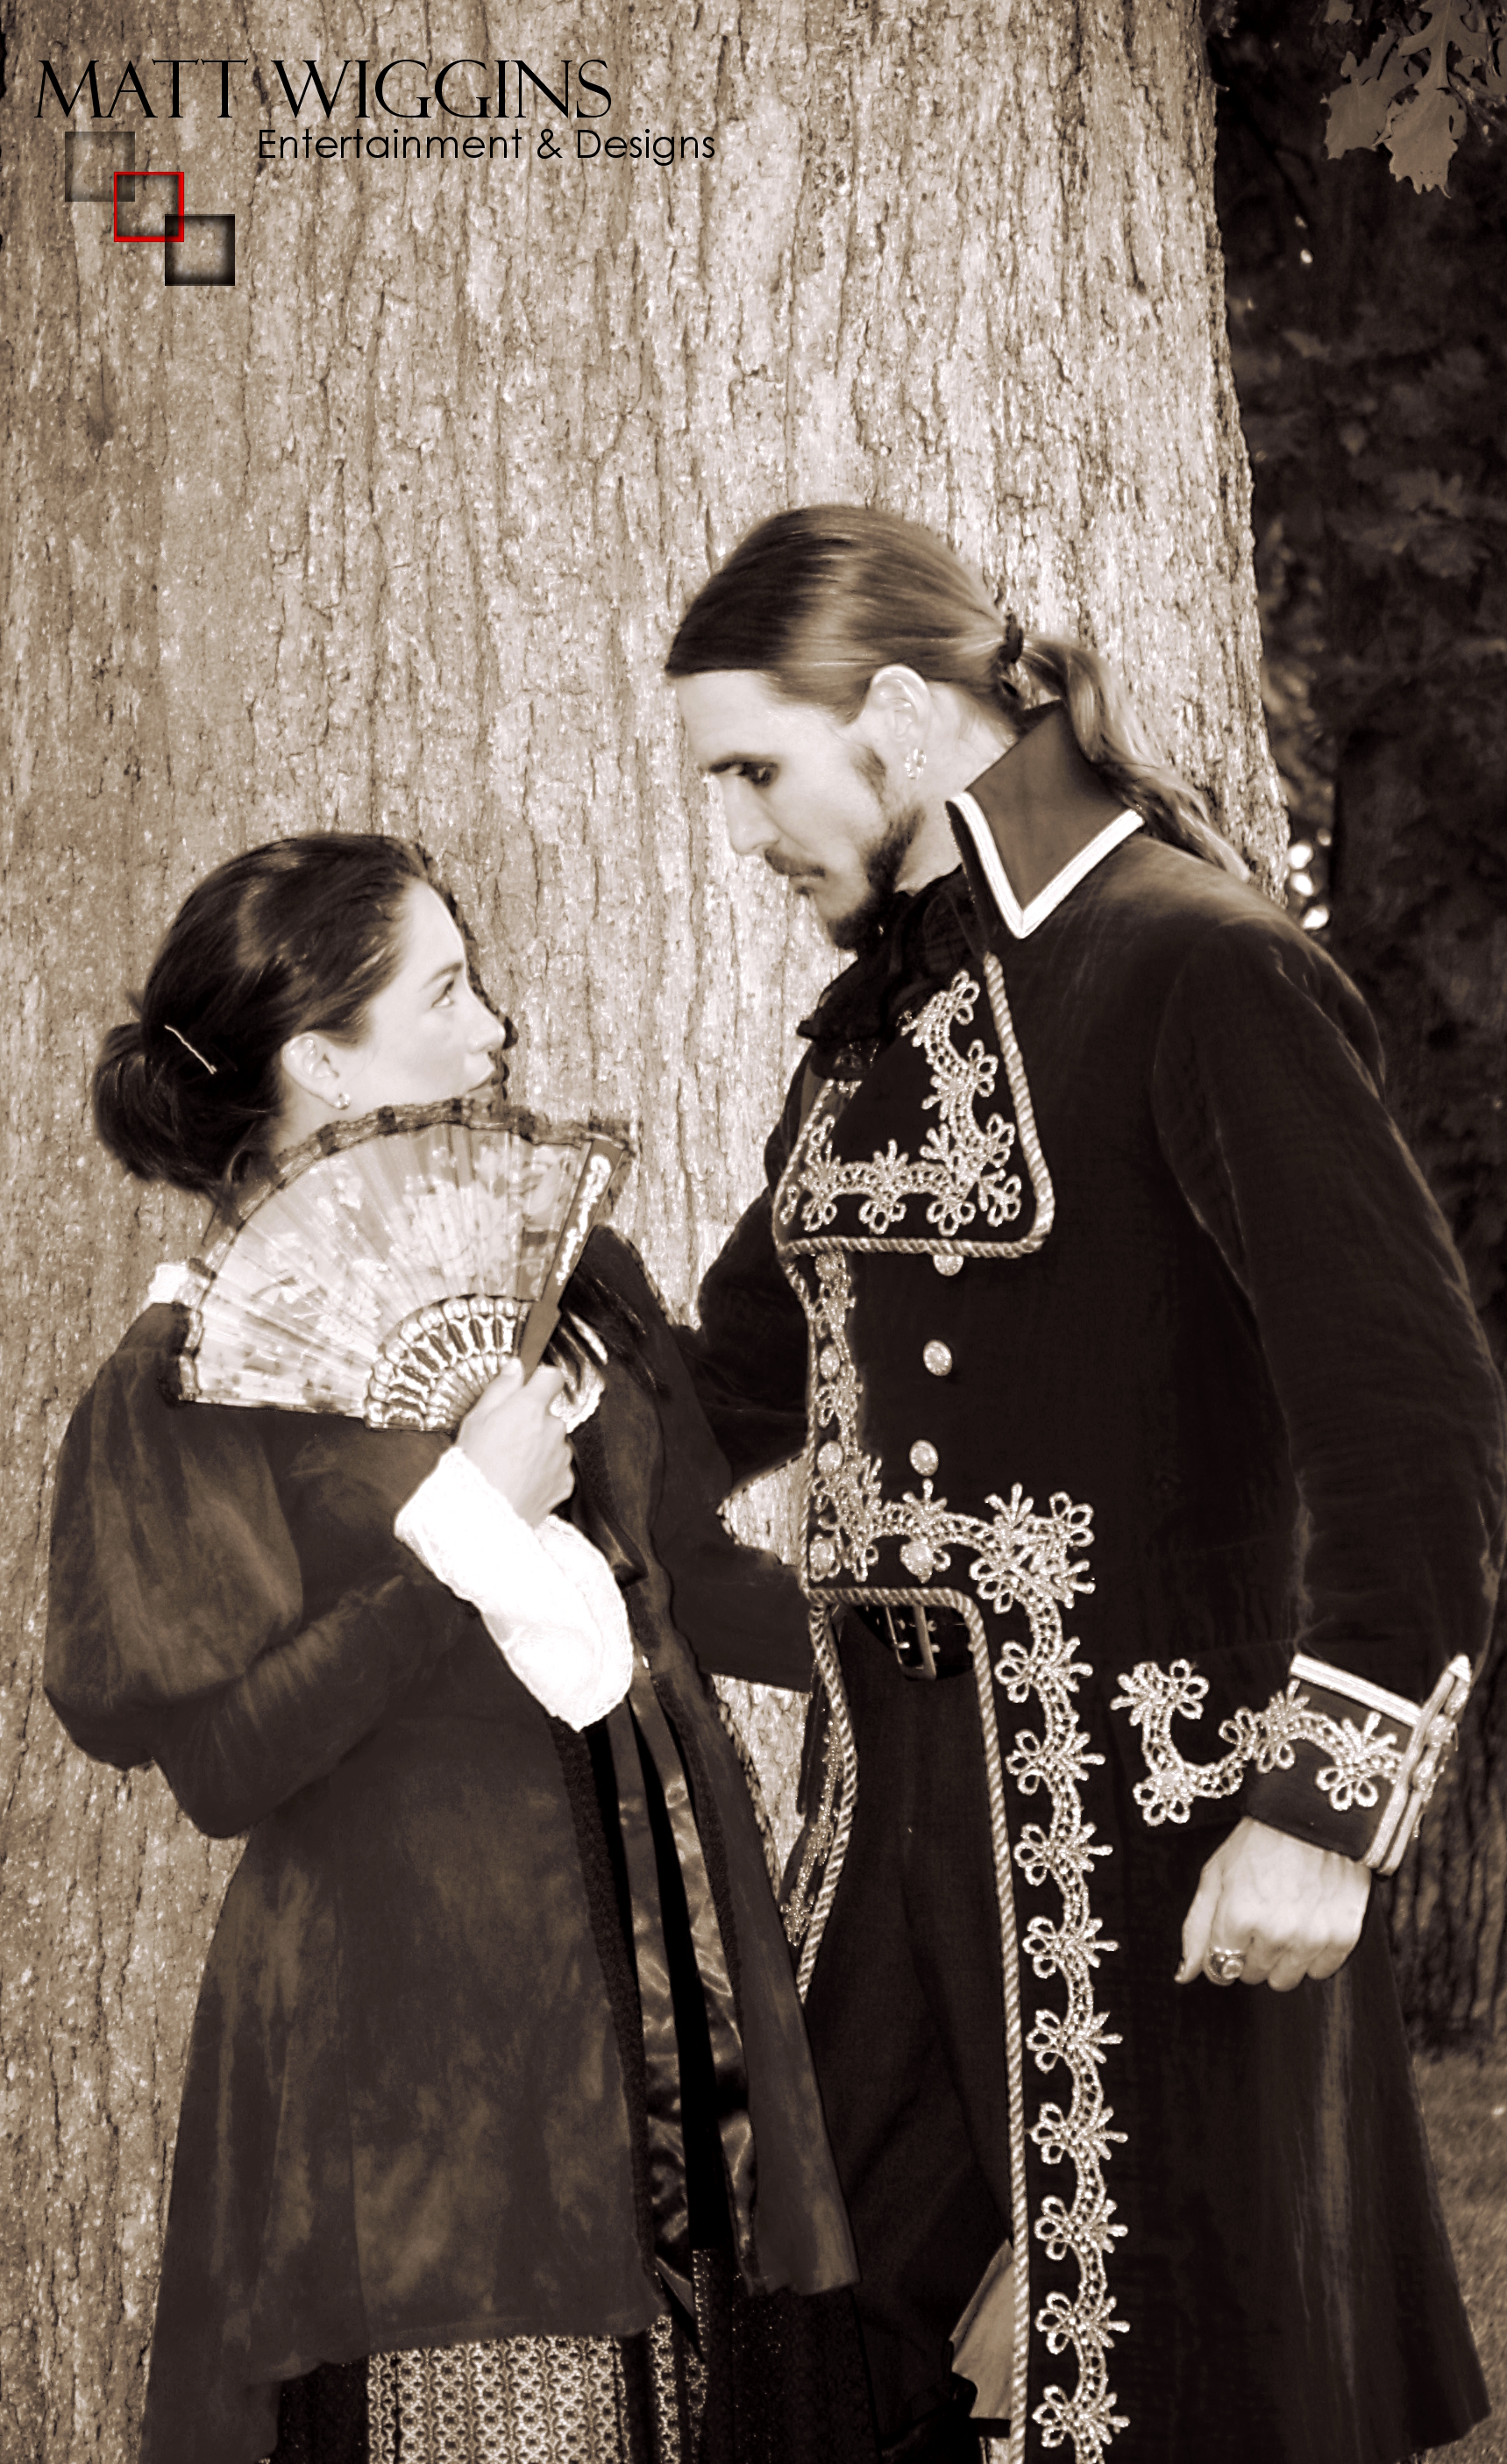 Matt Wiggins as Cassio with co-star during a rehearsal for a production of William Shakespeare's Othello.